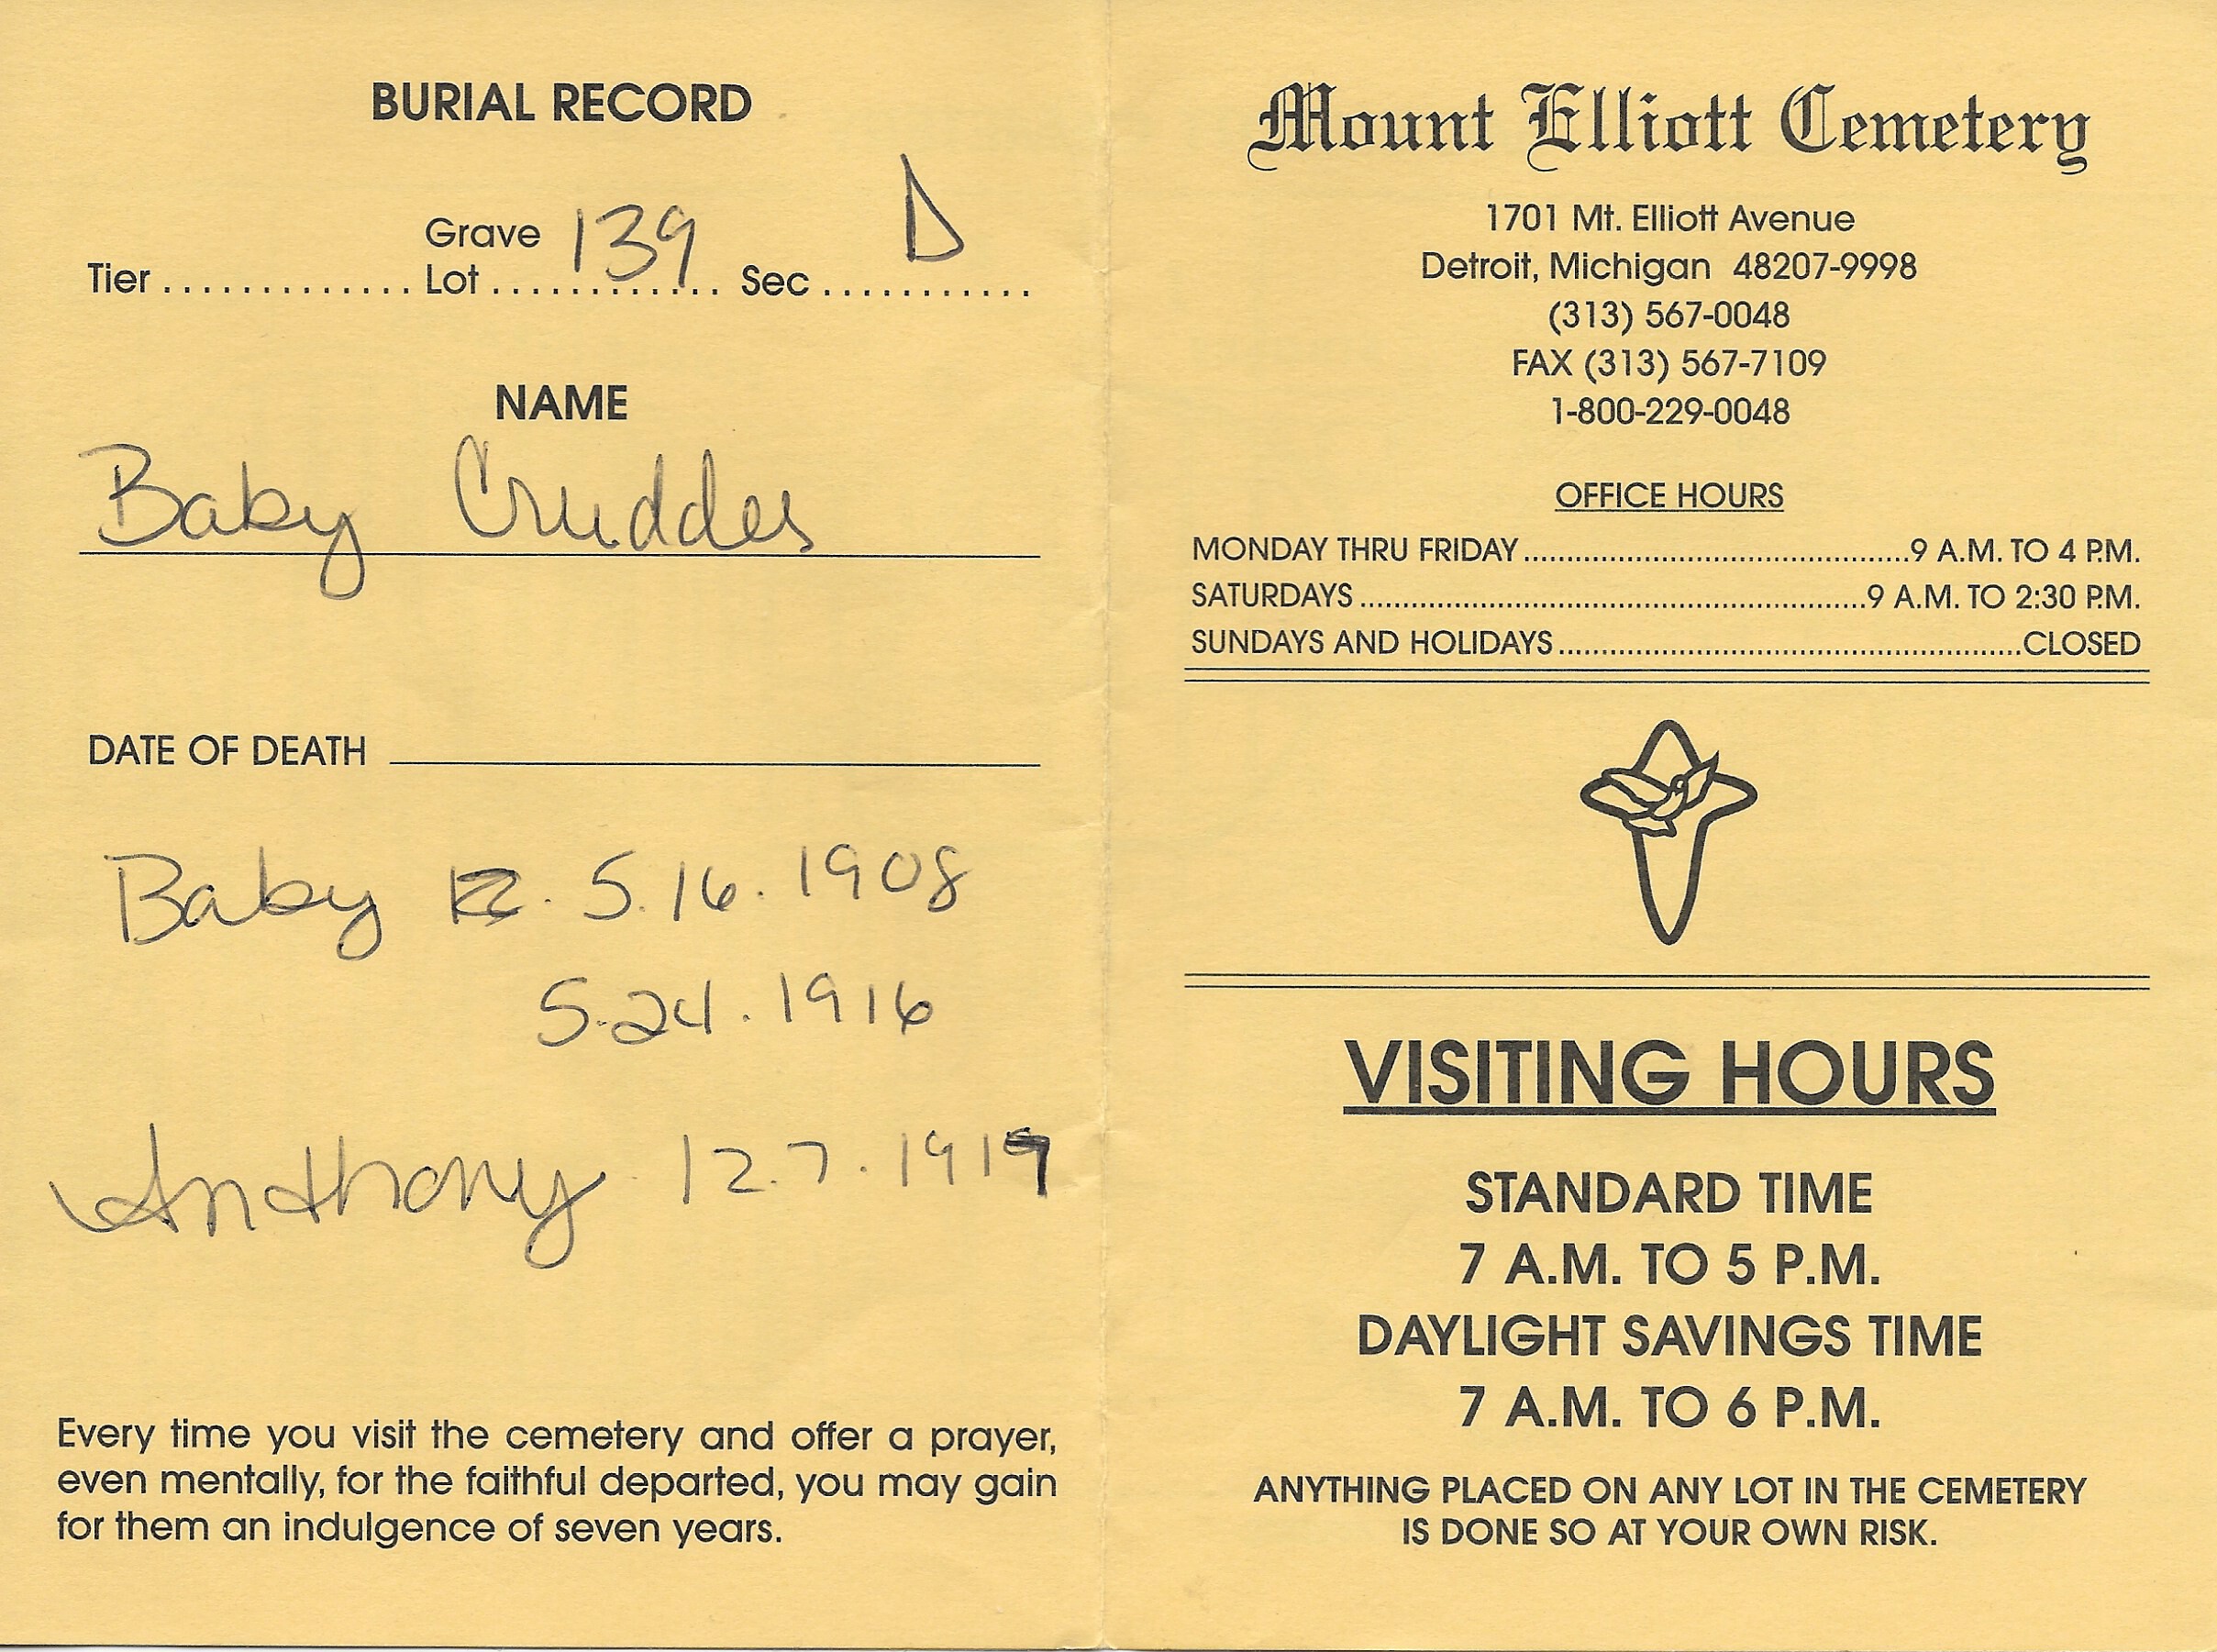 Burial record for Section D, Grave 139, Mount Elliott Cemetery, Detroit, showing death date of 3 infant Crudders